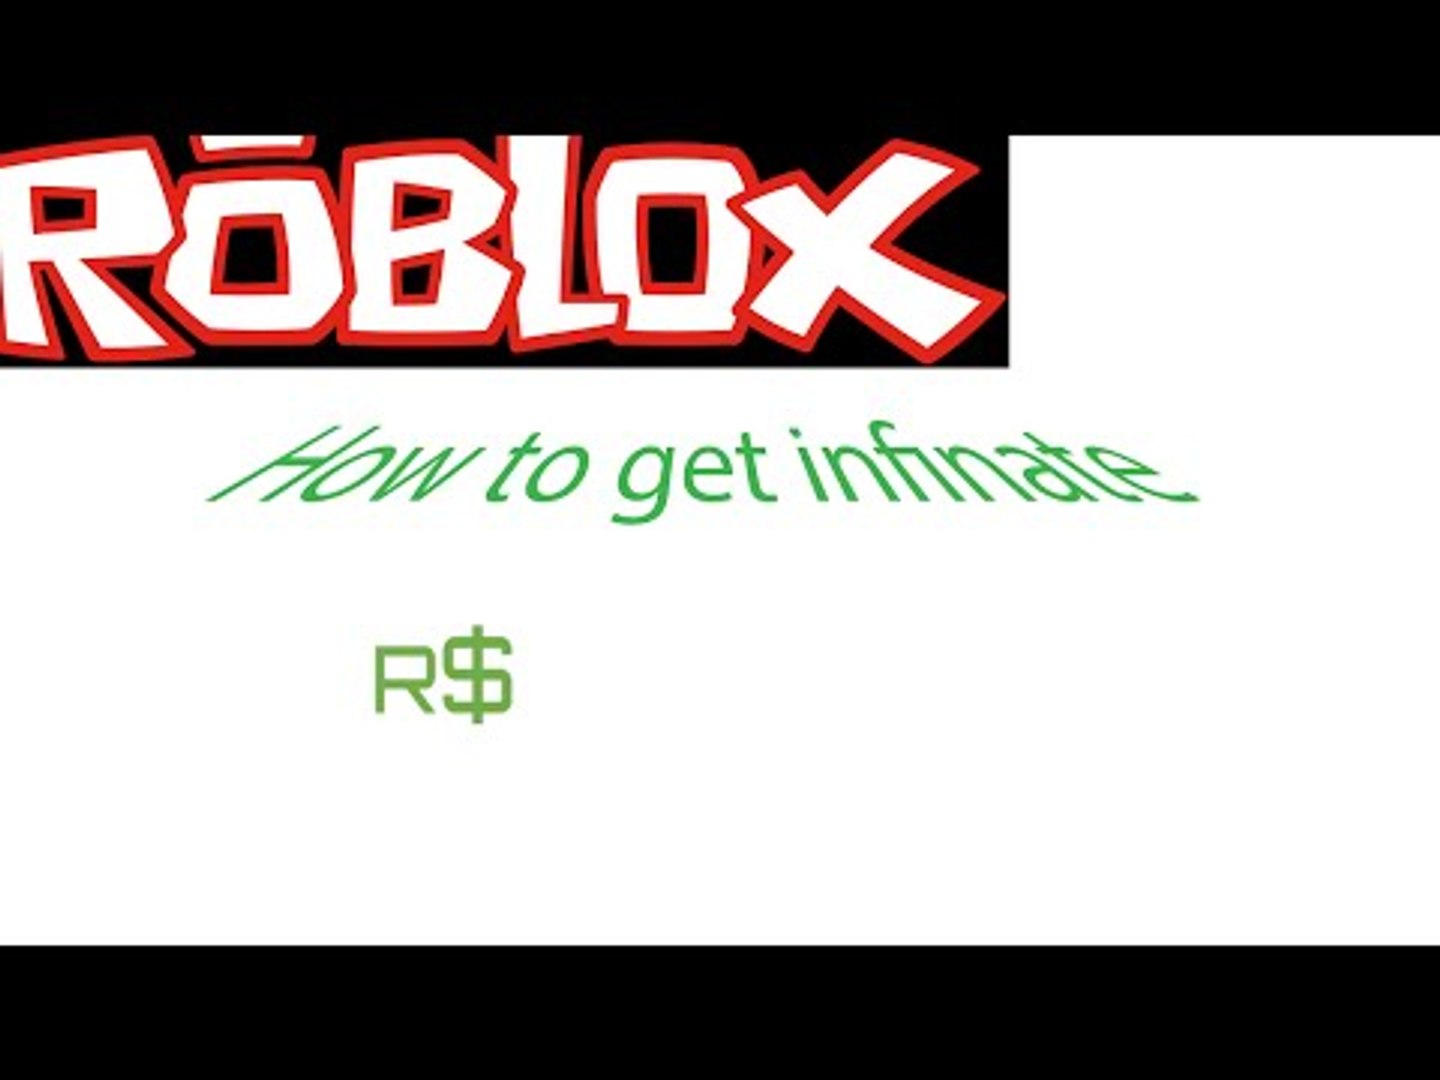 How To Get Infinate Robux On Roblox 2016 100 Works Video Dailymotion - how to make robux in between roblox sales videos infinitube